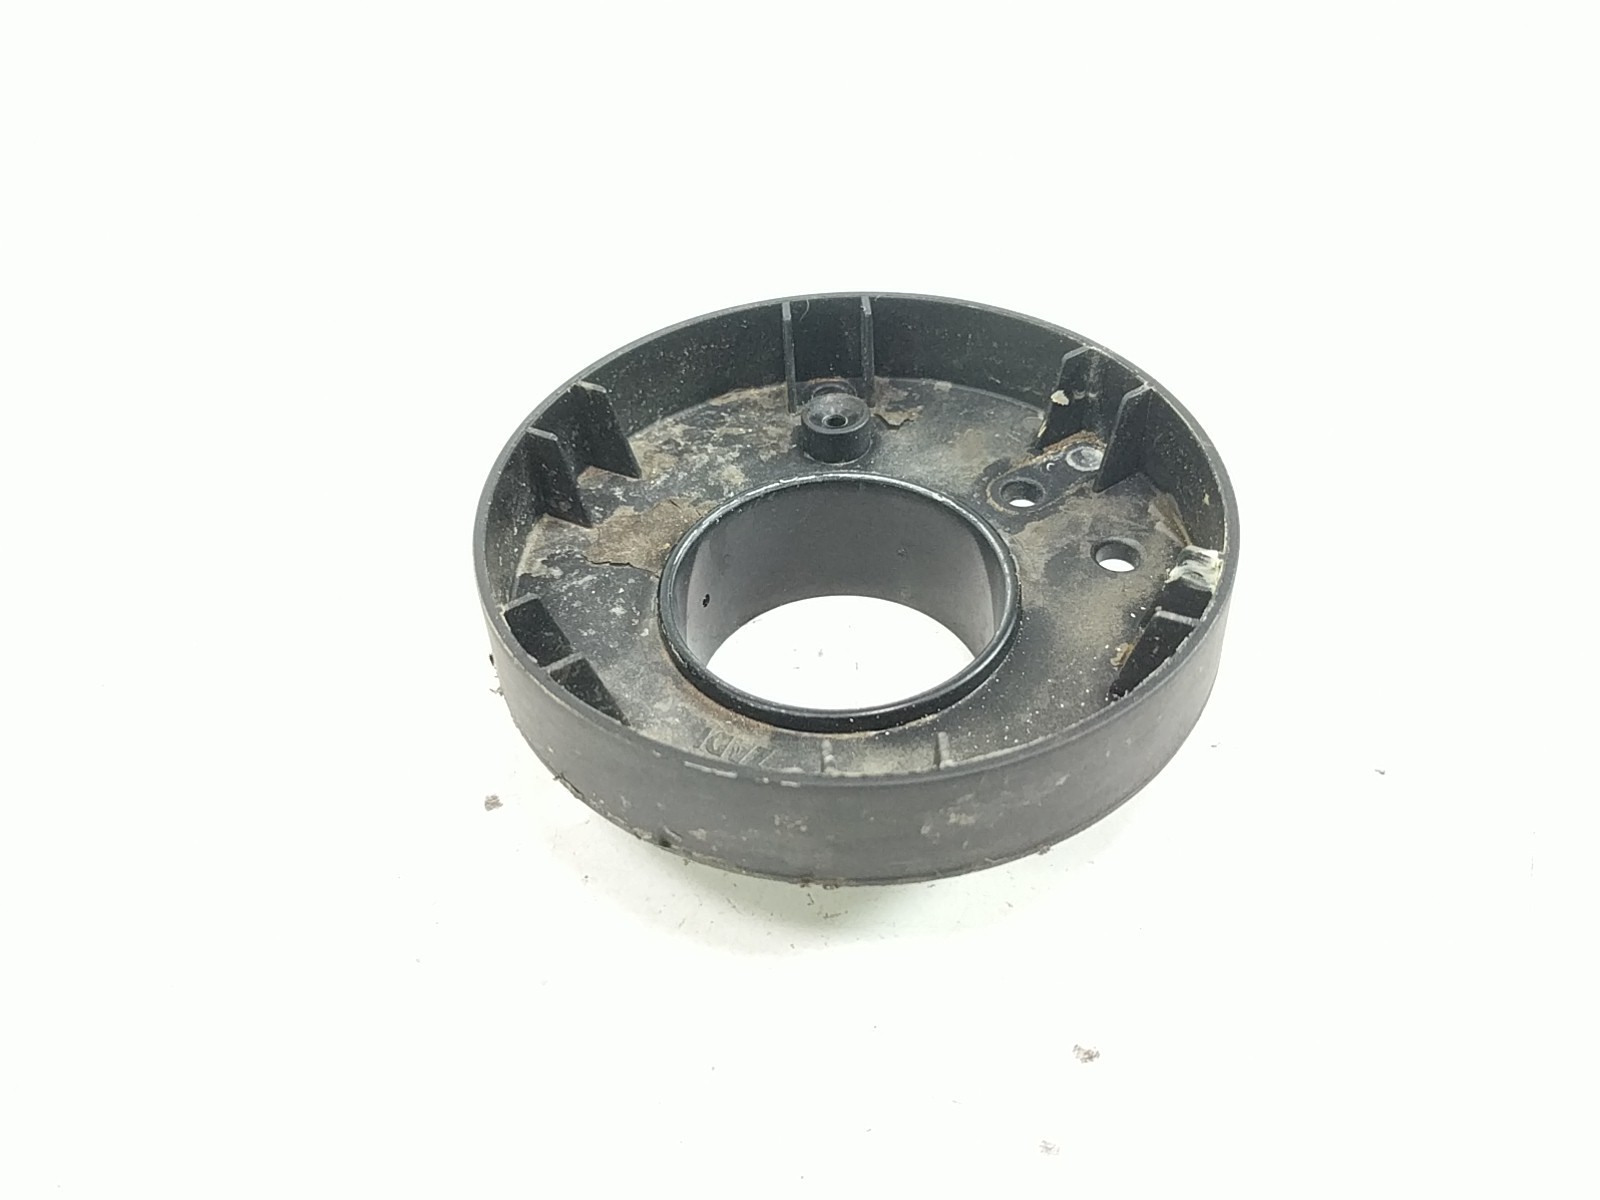 05 Triumph Tiger 955i Gas Fuel Spill Catch Backing Ring